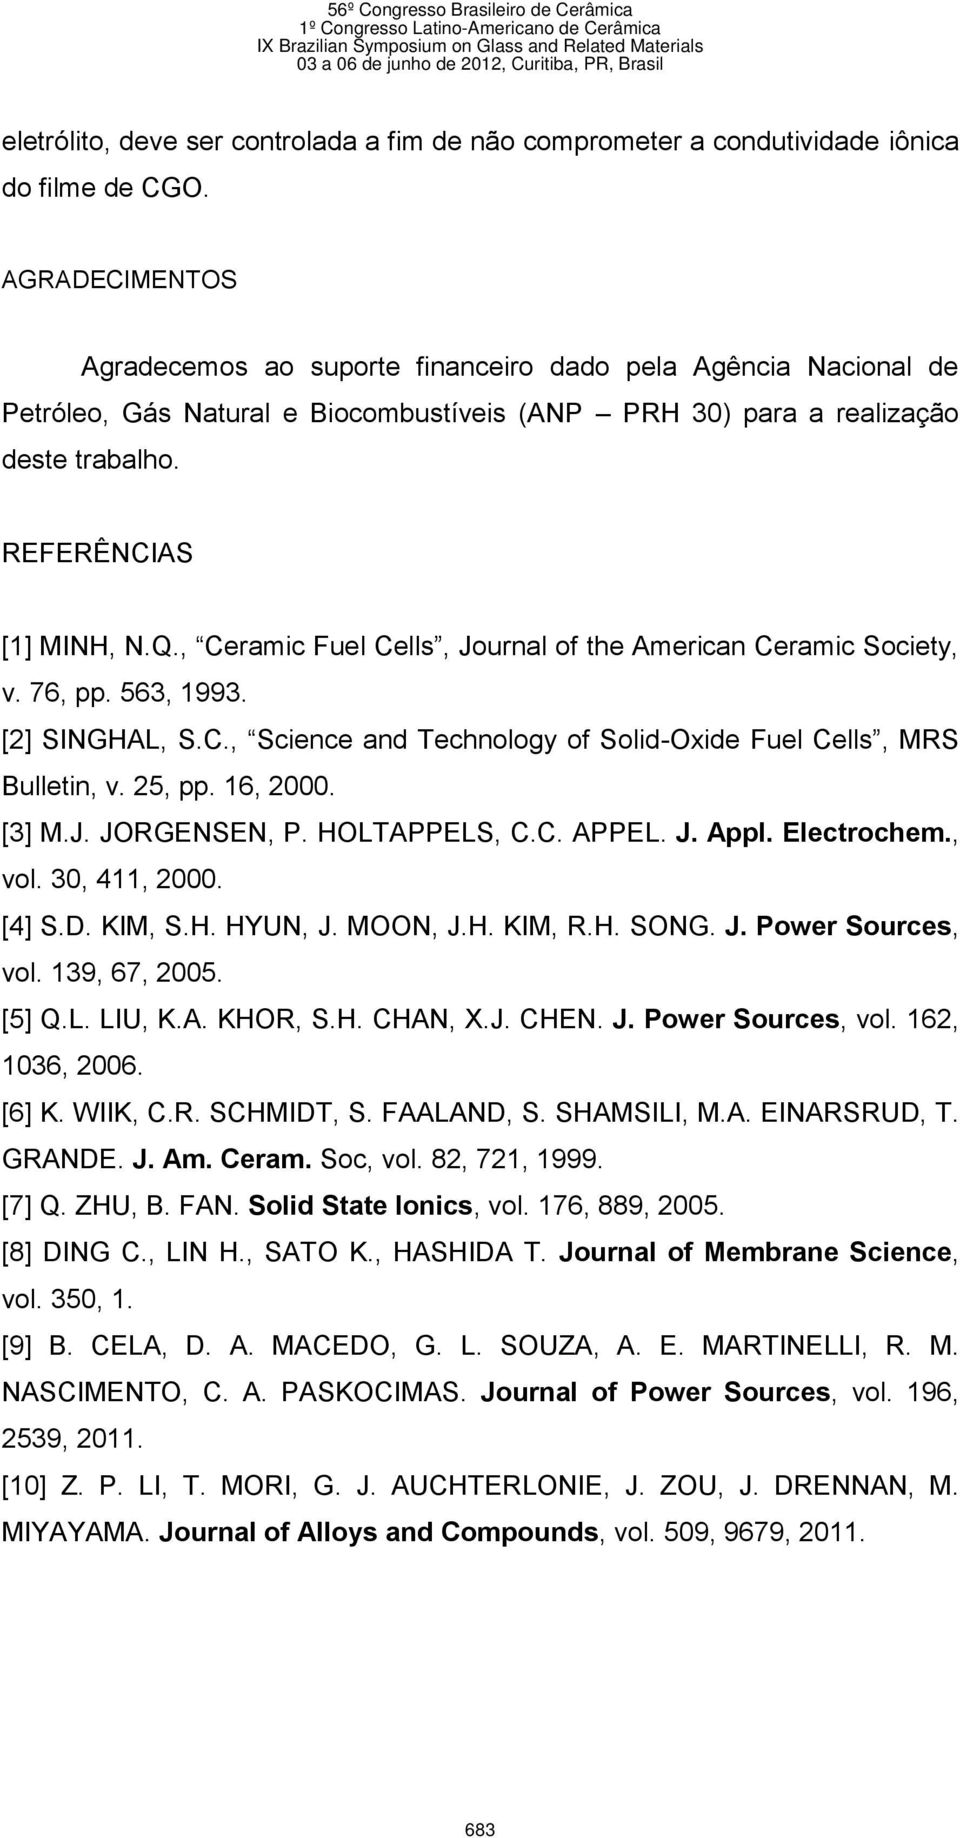 , Ceramic Fuel Cells, Journal of the American Ceramic Society, v. 76, pp. 563, 1993. [2] SINGHAL, S.C., Science and Technology of Solid-Oxide Fuel Cells, MRS Bulletin, v. 25, pp. 16, 2000. [3] M.J. JORGENSEN, P.